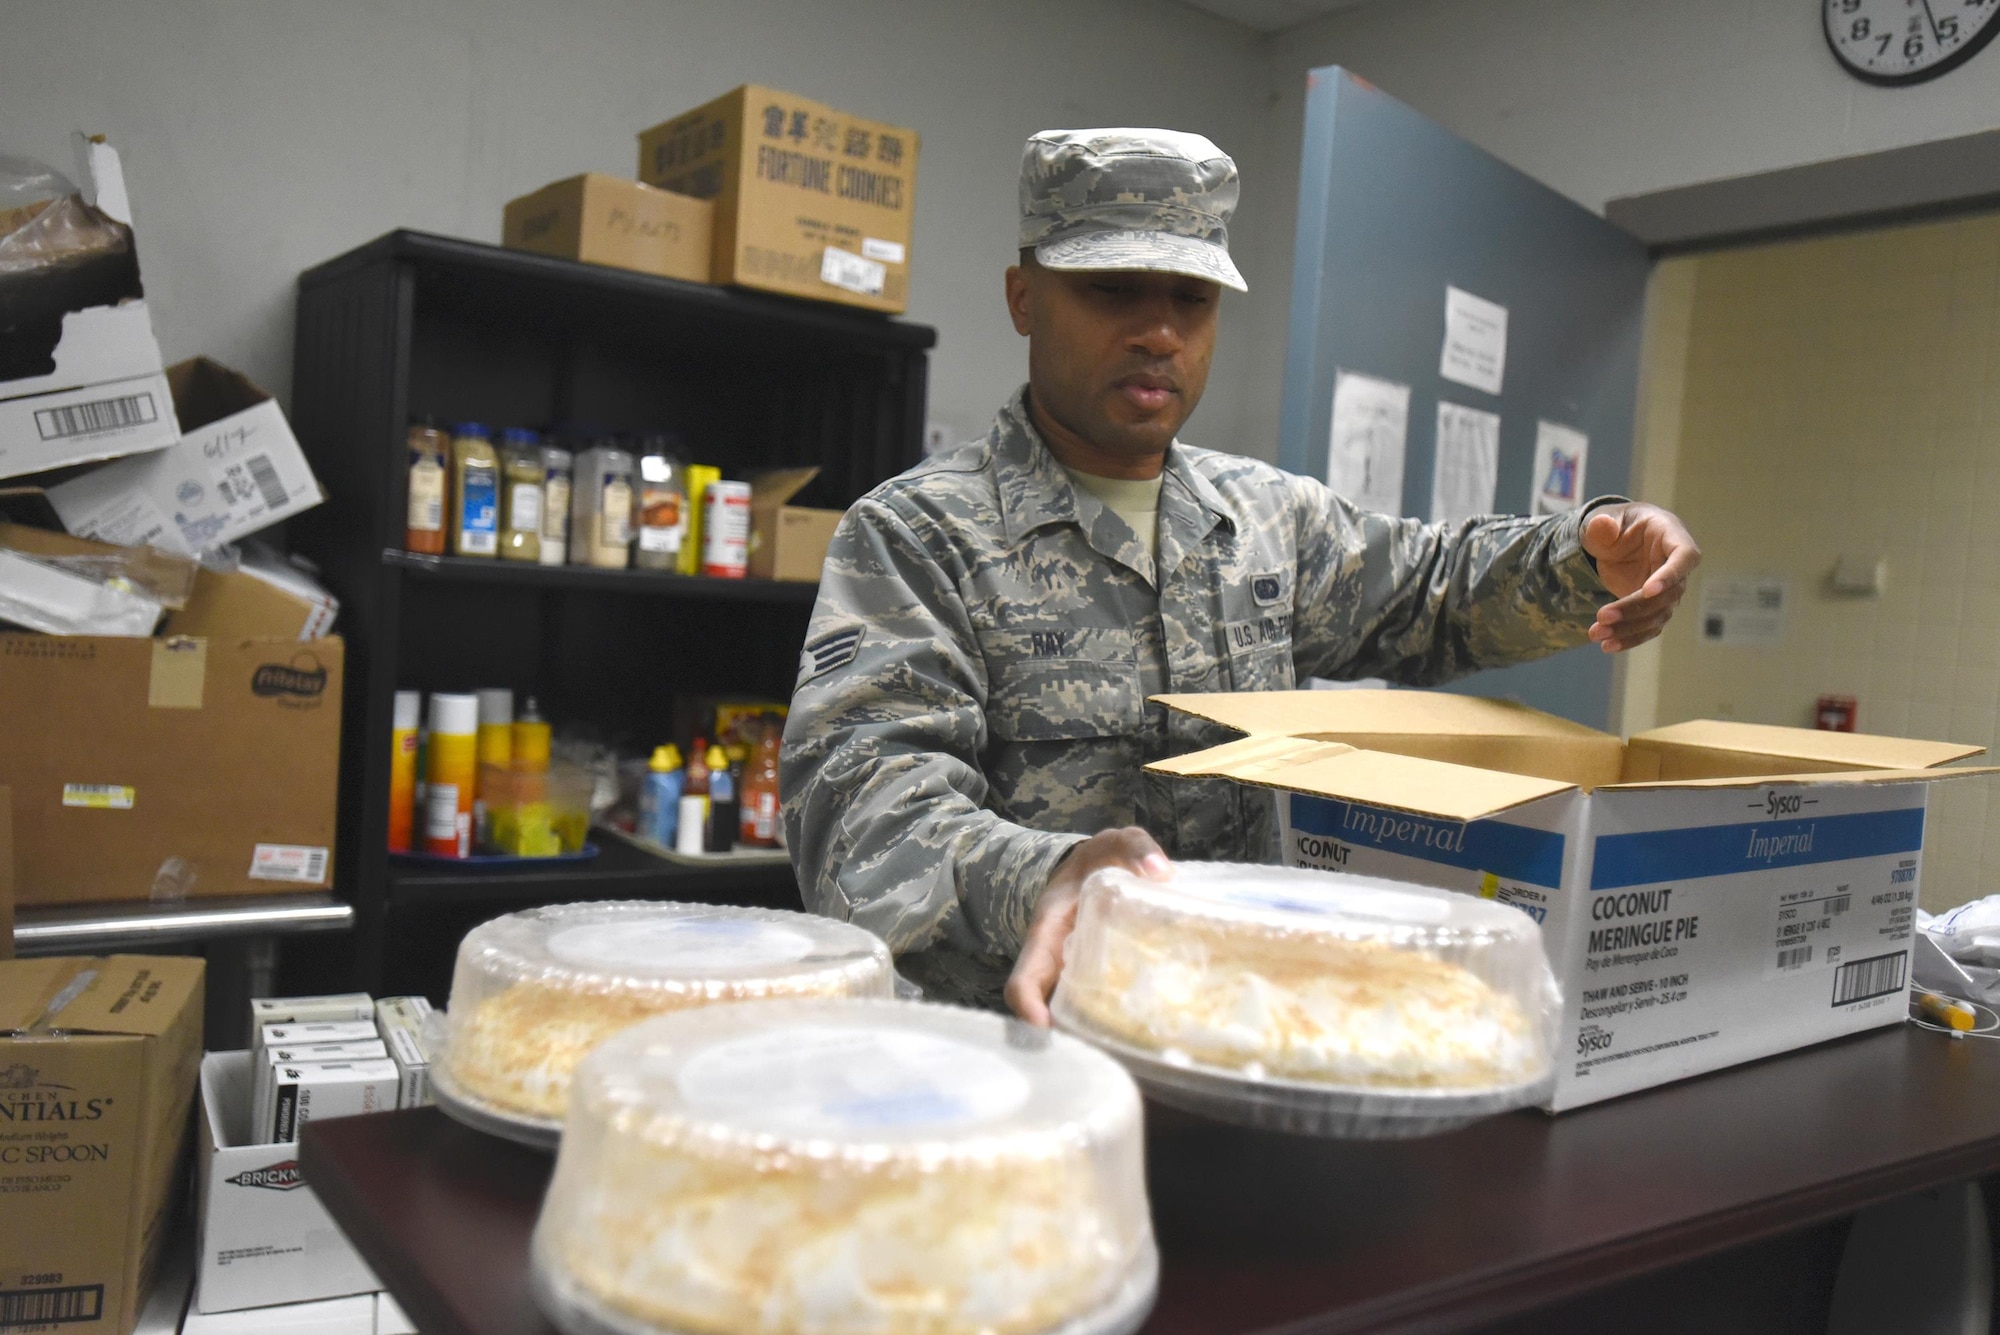 Senior Airman Raymond Ray, a cook for the Kentucky Air National Guard’s 123rd Services Flight in Louisville, Kentucky, sets pies out to thaw in the base dining facility June 6, 2017. Airmen from the unit serve desserts that are both pre-made and made on site. The unit recently was recognized as the best food service organization in the Air National Guard. (U.S. Air National Guard photo by Tech. Sgt. Vicky Spesard)